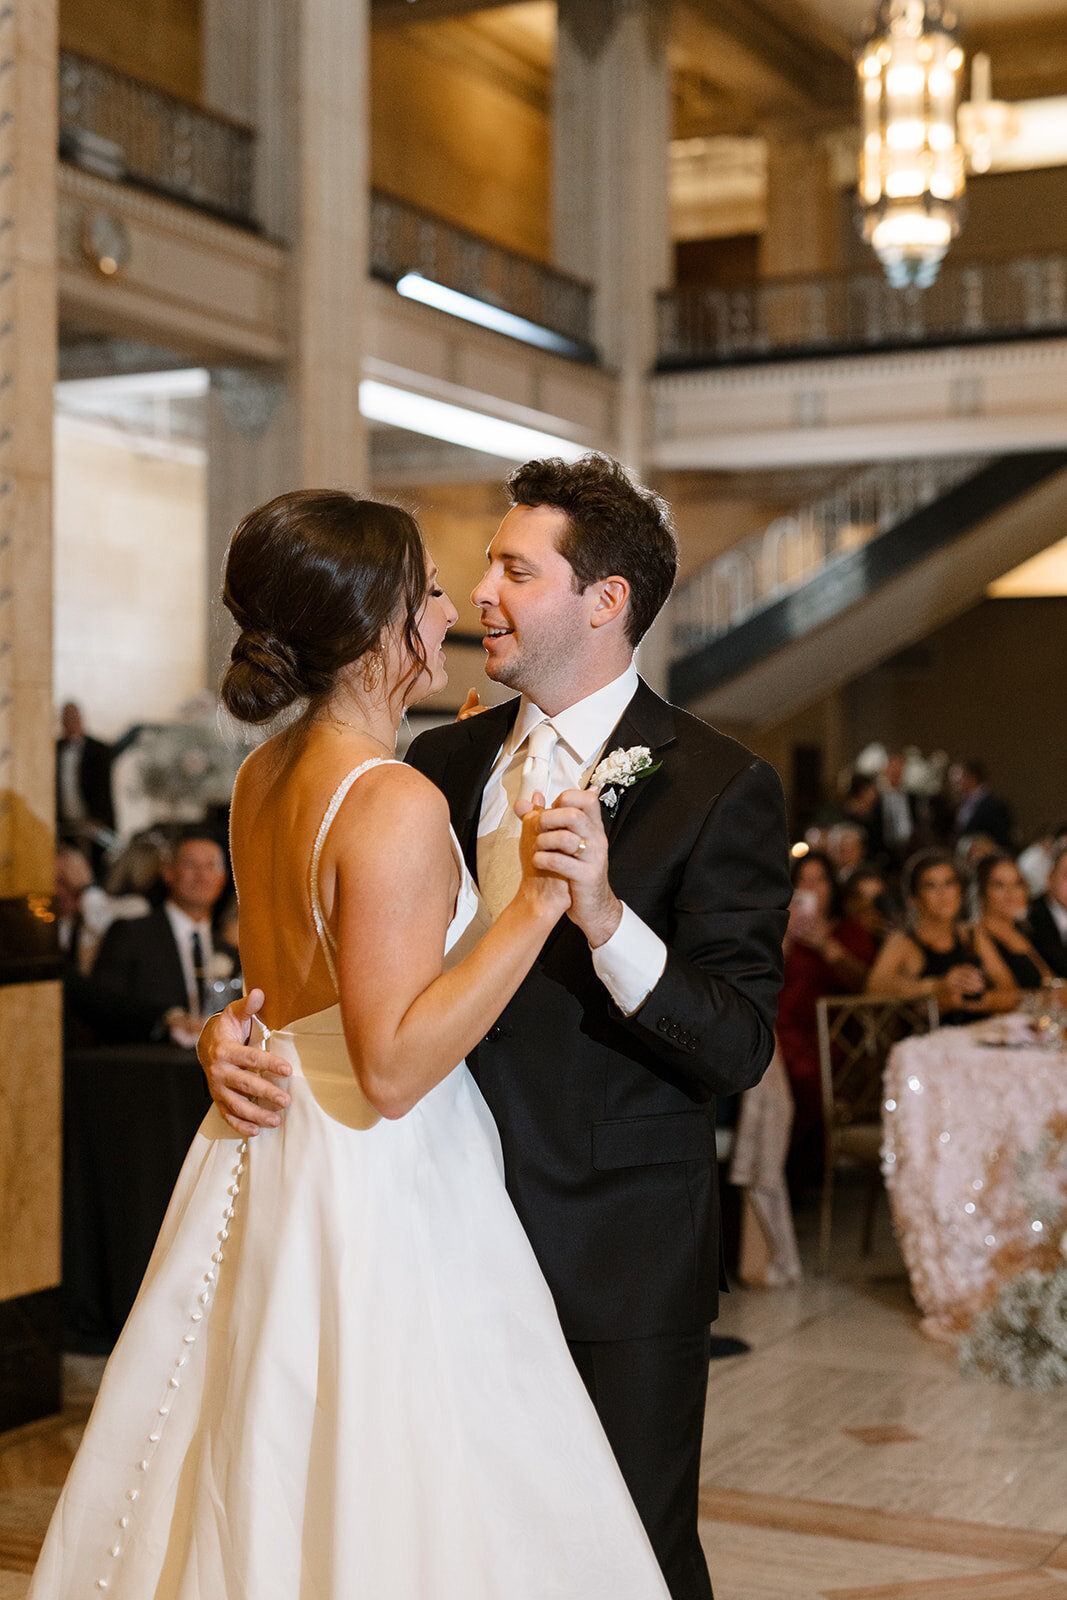 Kylie and Jack at The Grand Hall - Kansas City Wedding Photograpy - Nick and Lexie Photo Film-920